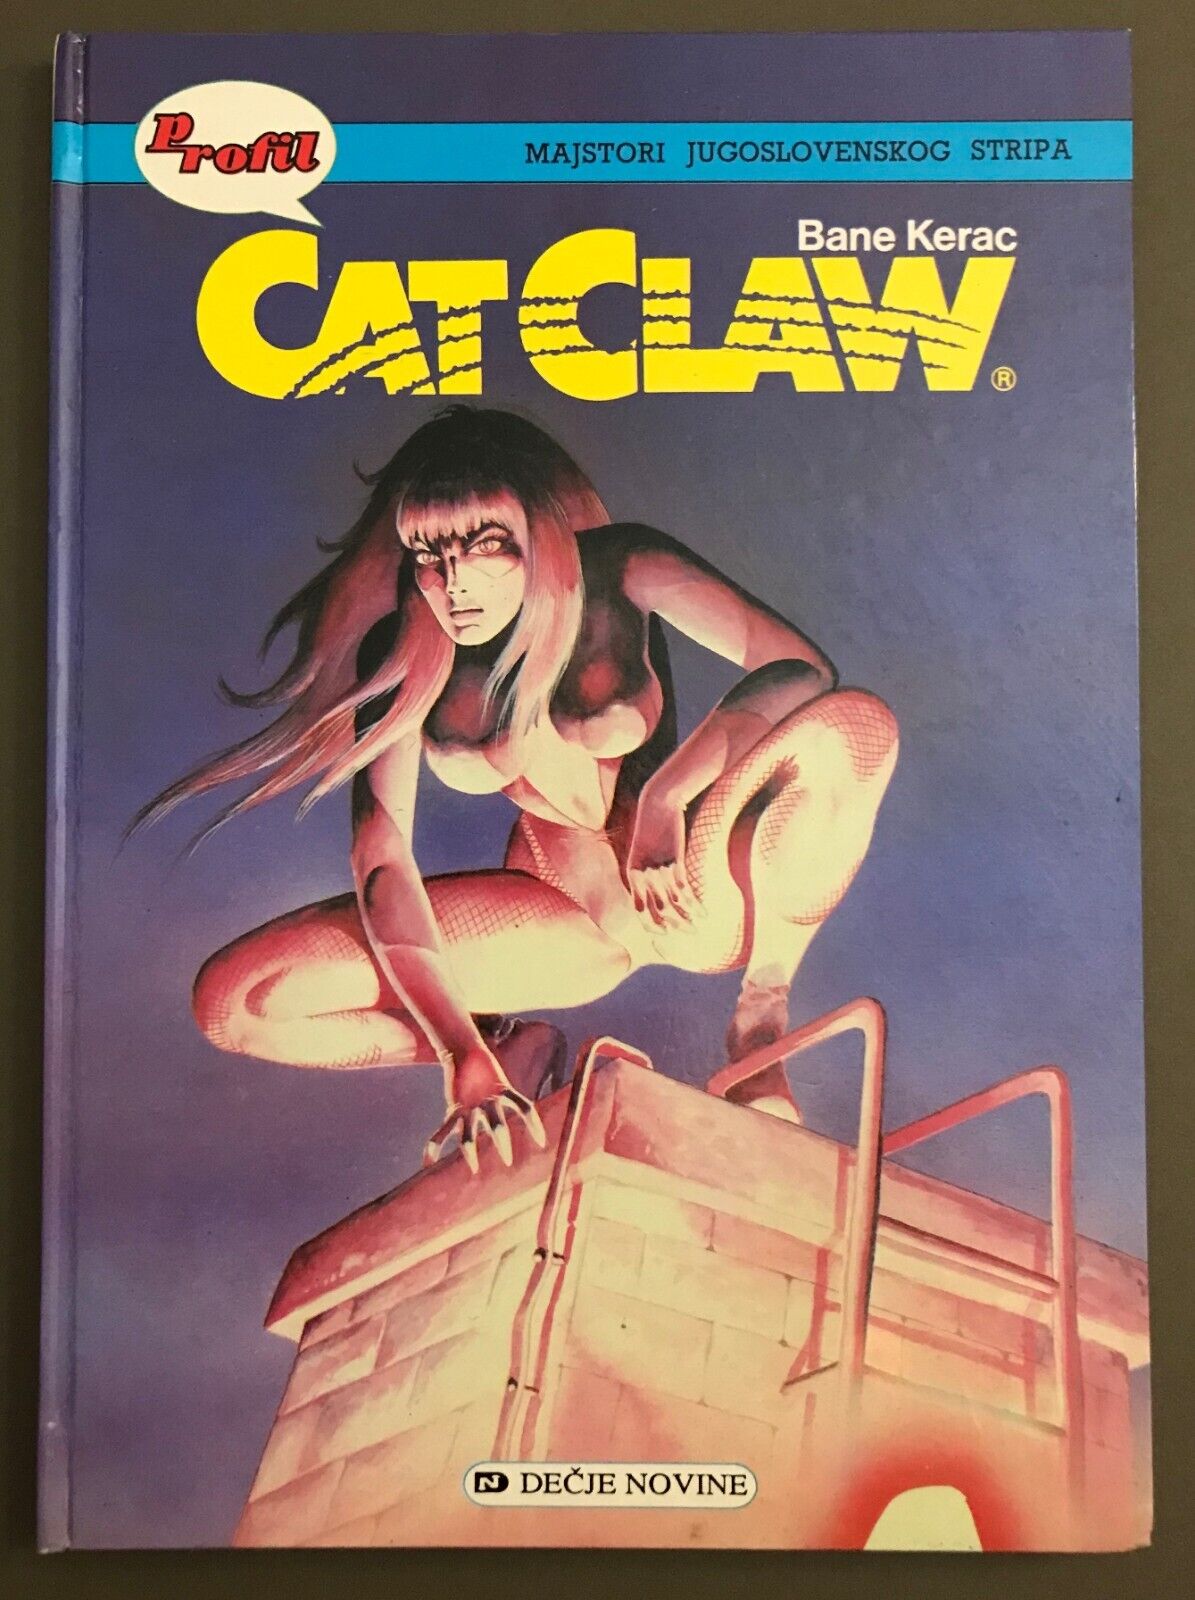 1991 Cat Claw Hard cover book